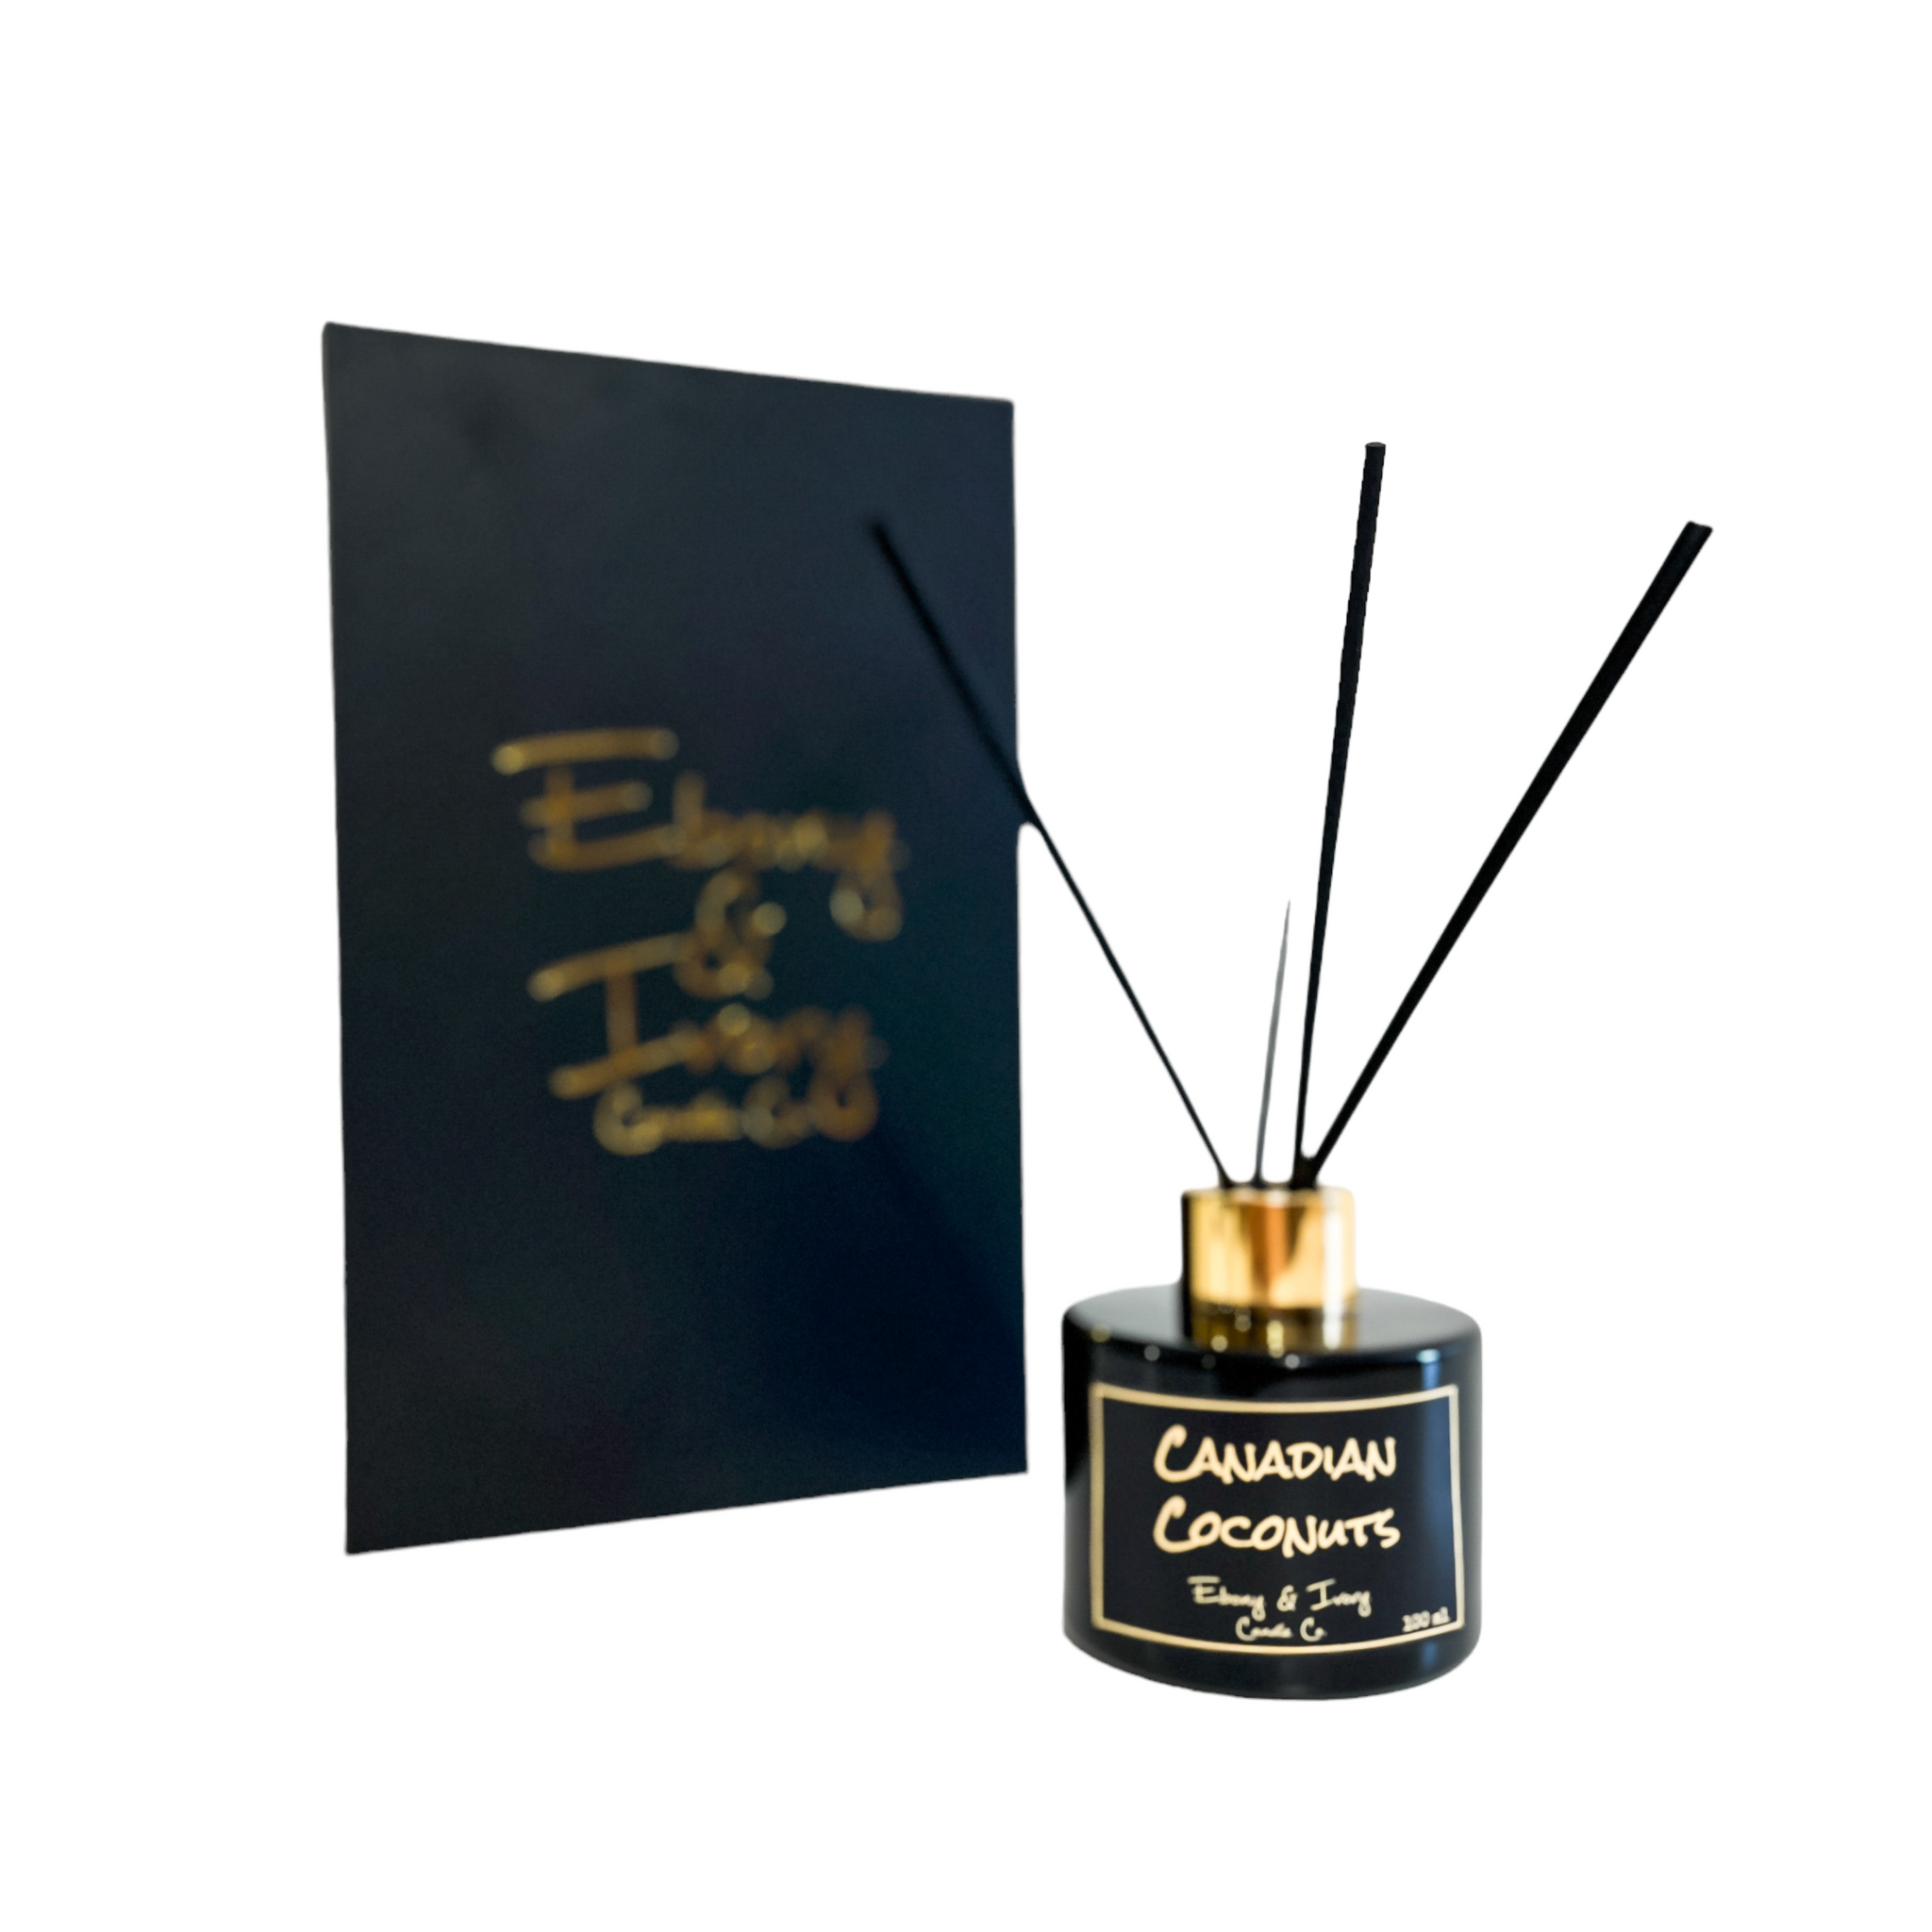 Black, one hundred milliliter, Coconut, pineapple, and vanilla scented reed diffuser with a gold lid and a black label that reads Canadian Coconuts